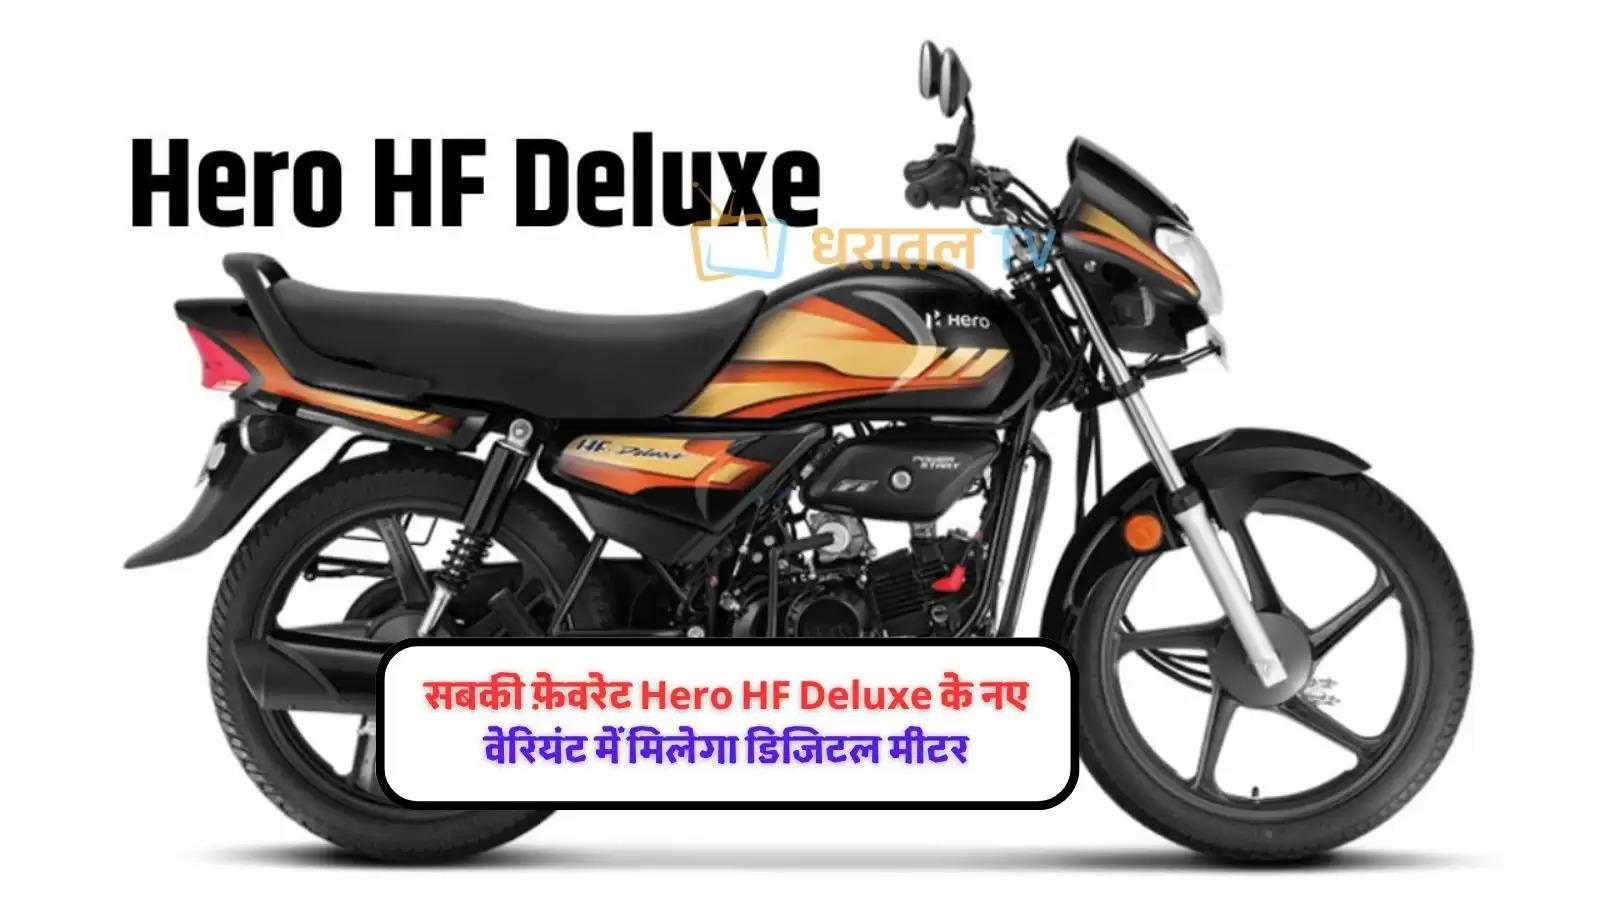 hf-deluxe-2023-with-digital-meter-has-arrived-will-get-this-new-feature